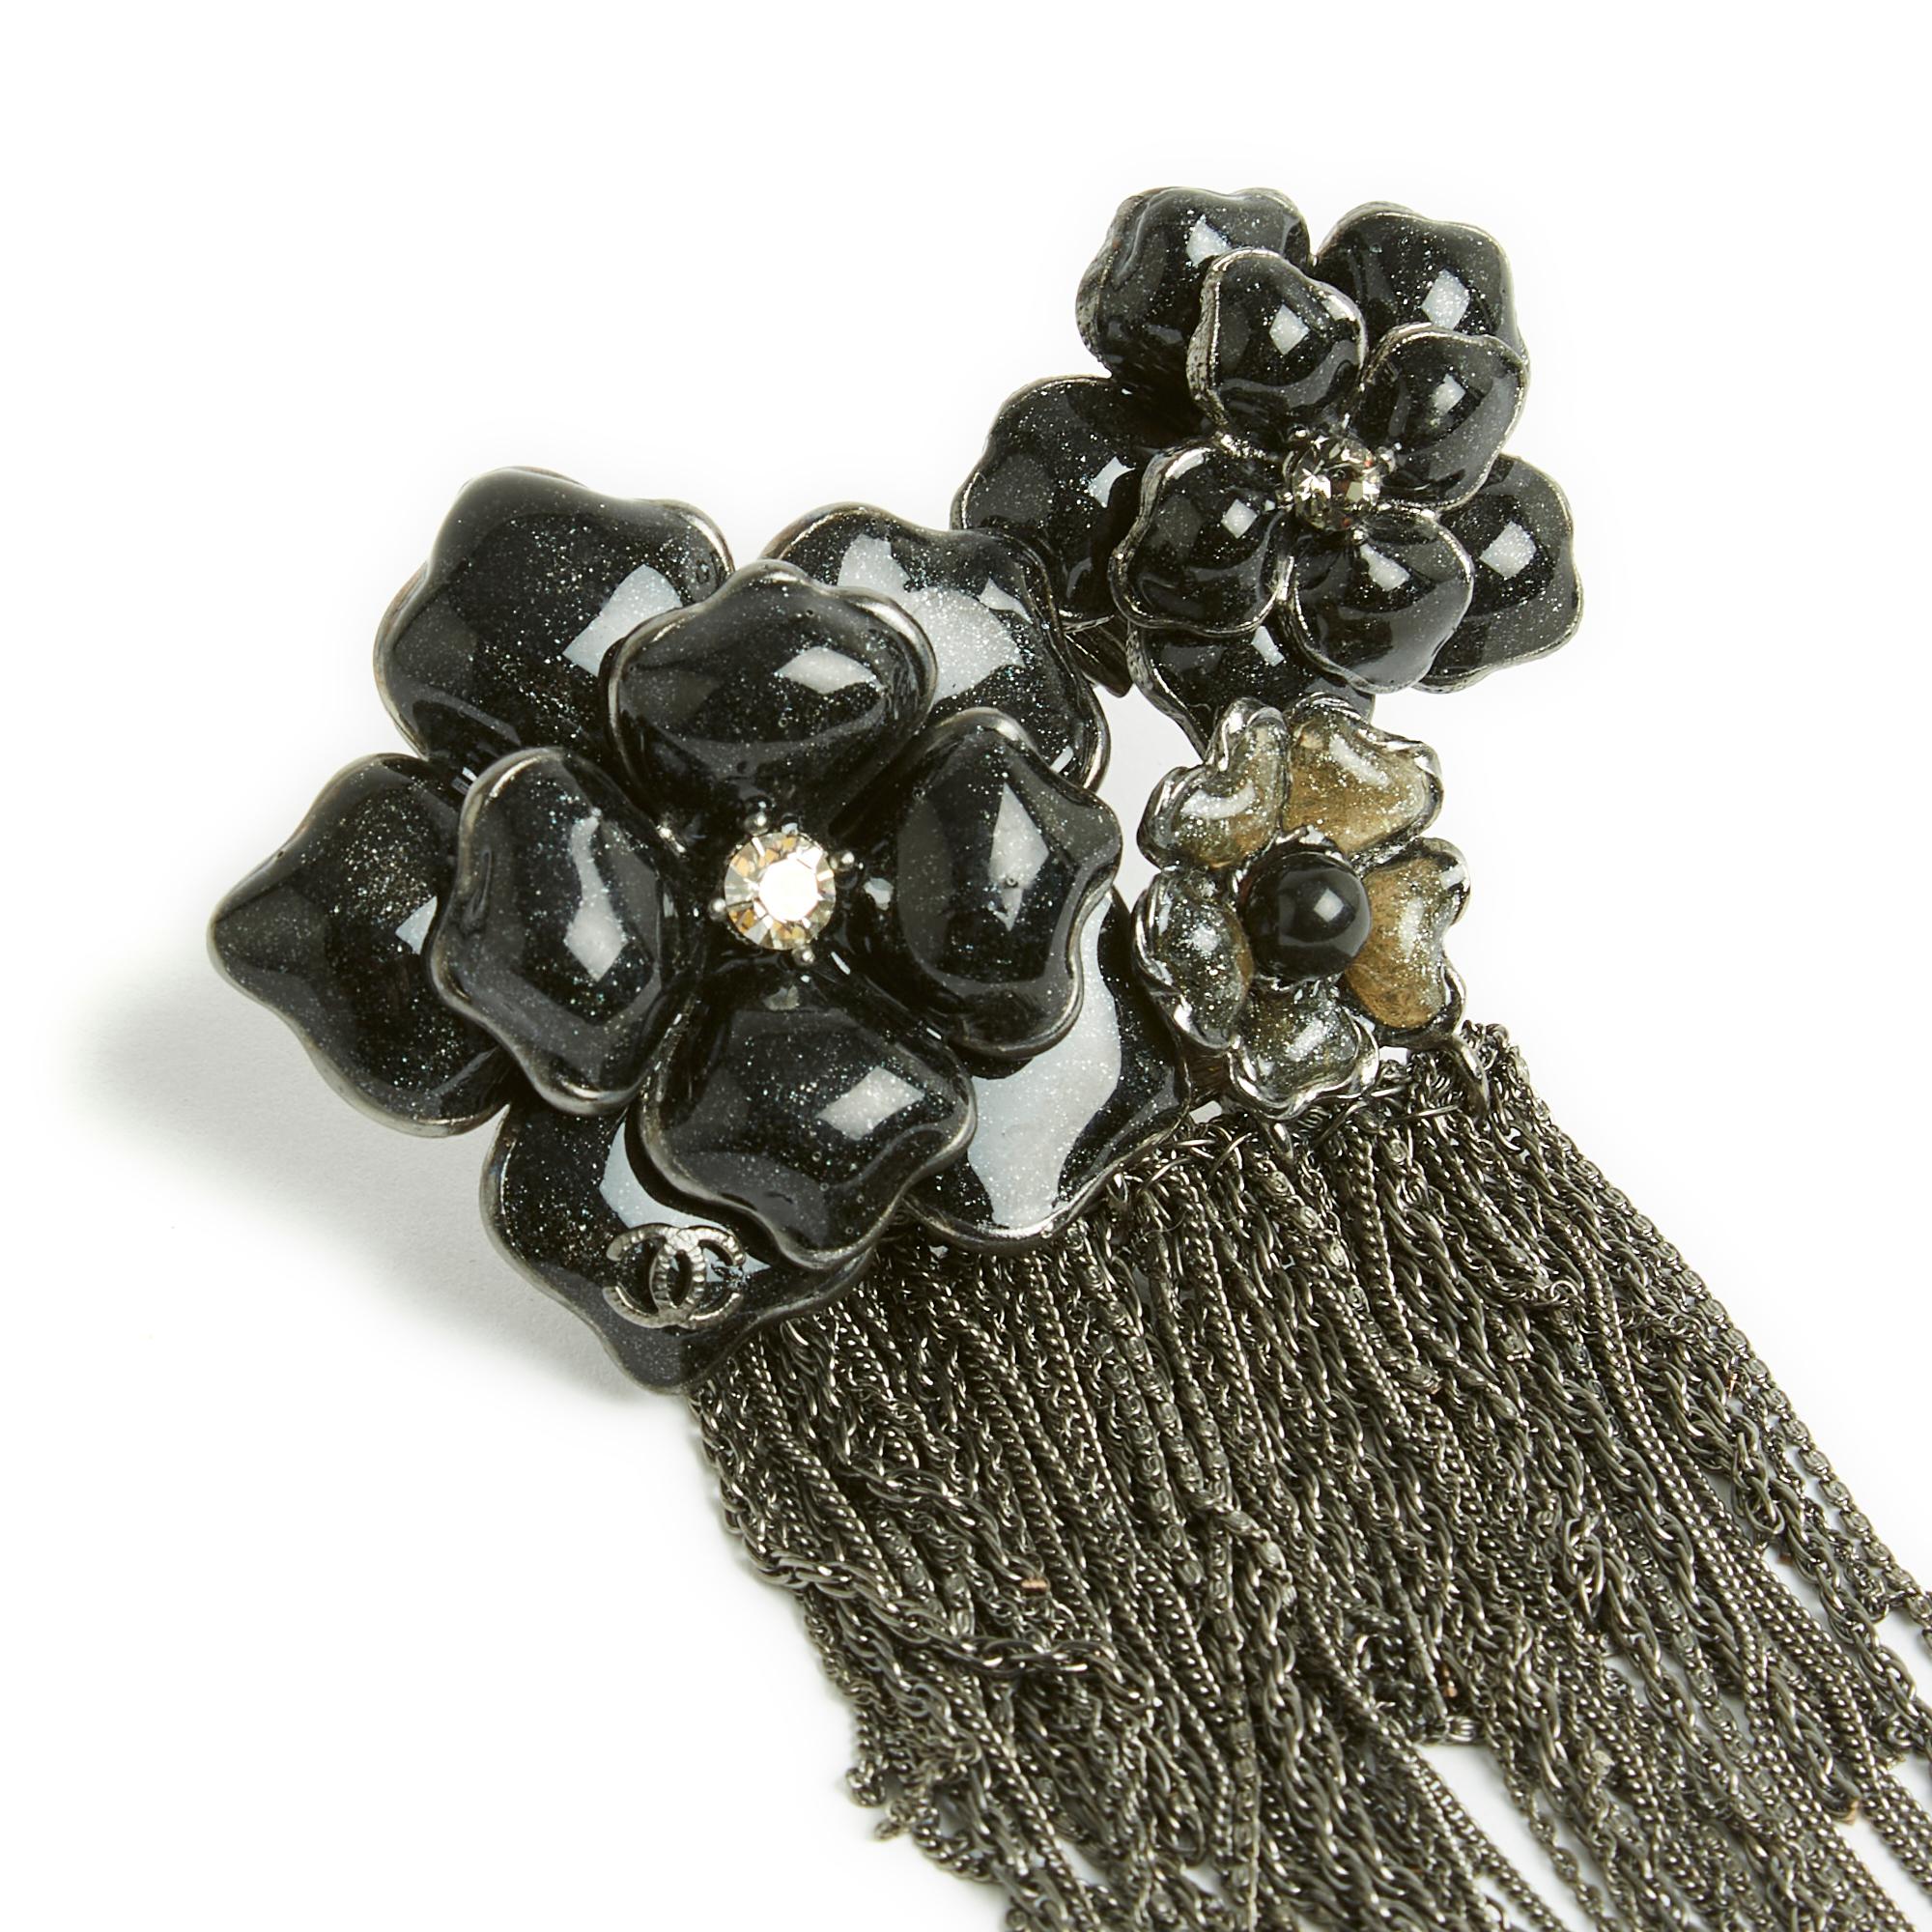 Chanel brooch probably Haute Couture in silver metal composed of 3 camellia flowers in glass paste or black and anthracite gray resin inlaid with sequins and multiple hanging chains. Width 7.4 cm, total length 14 cm. The brooch is in excellent